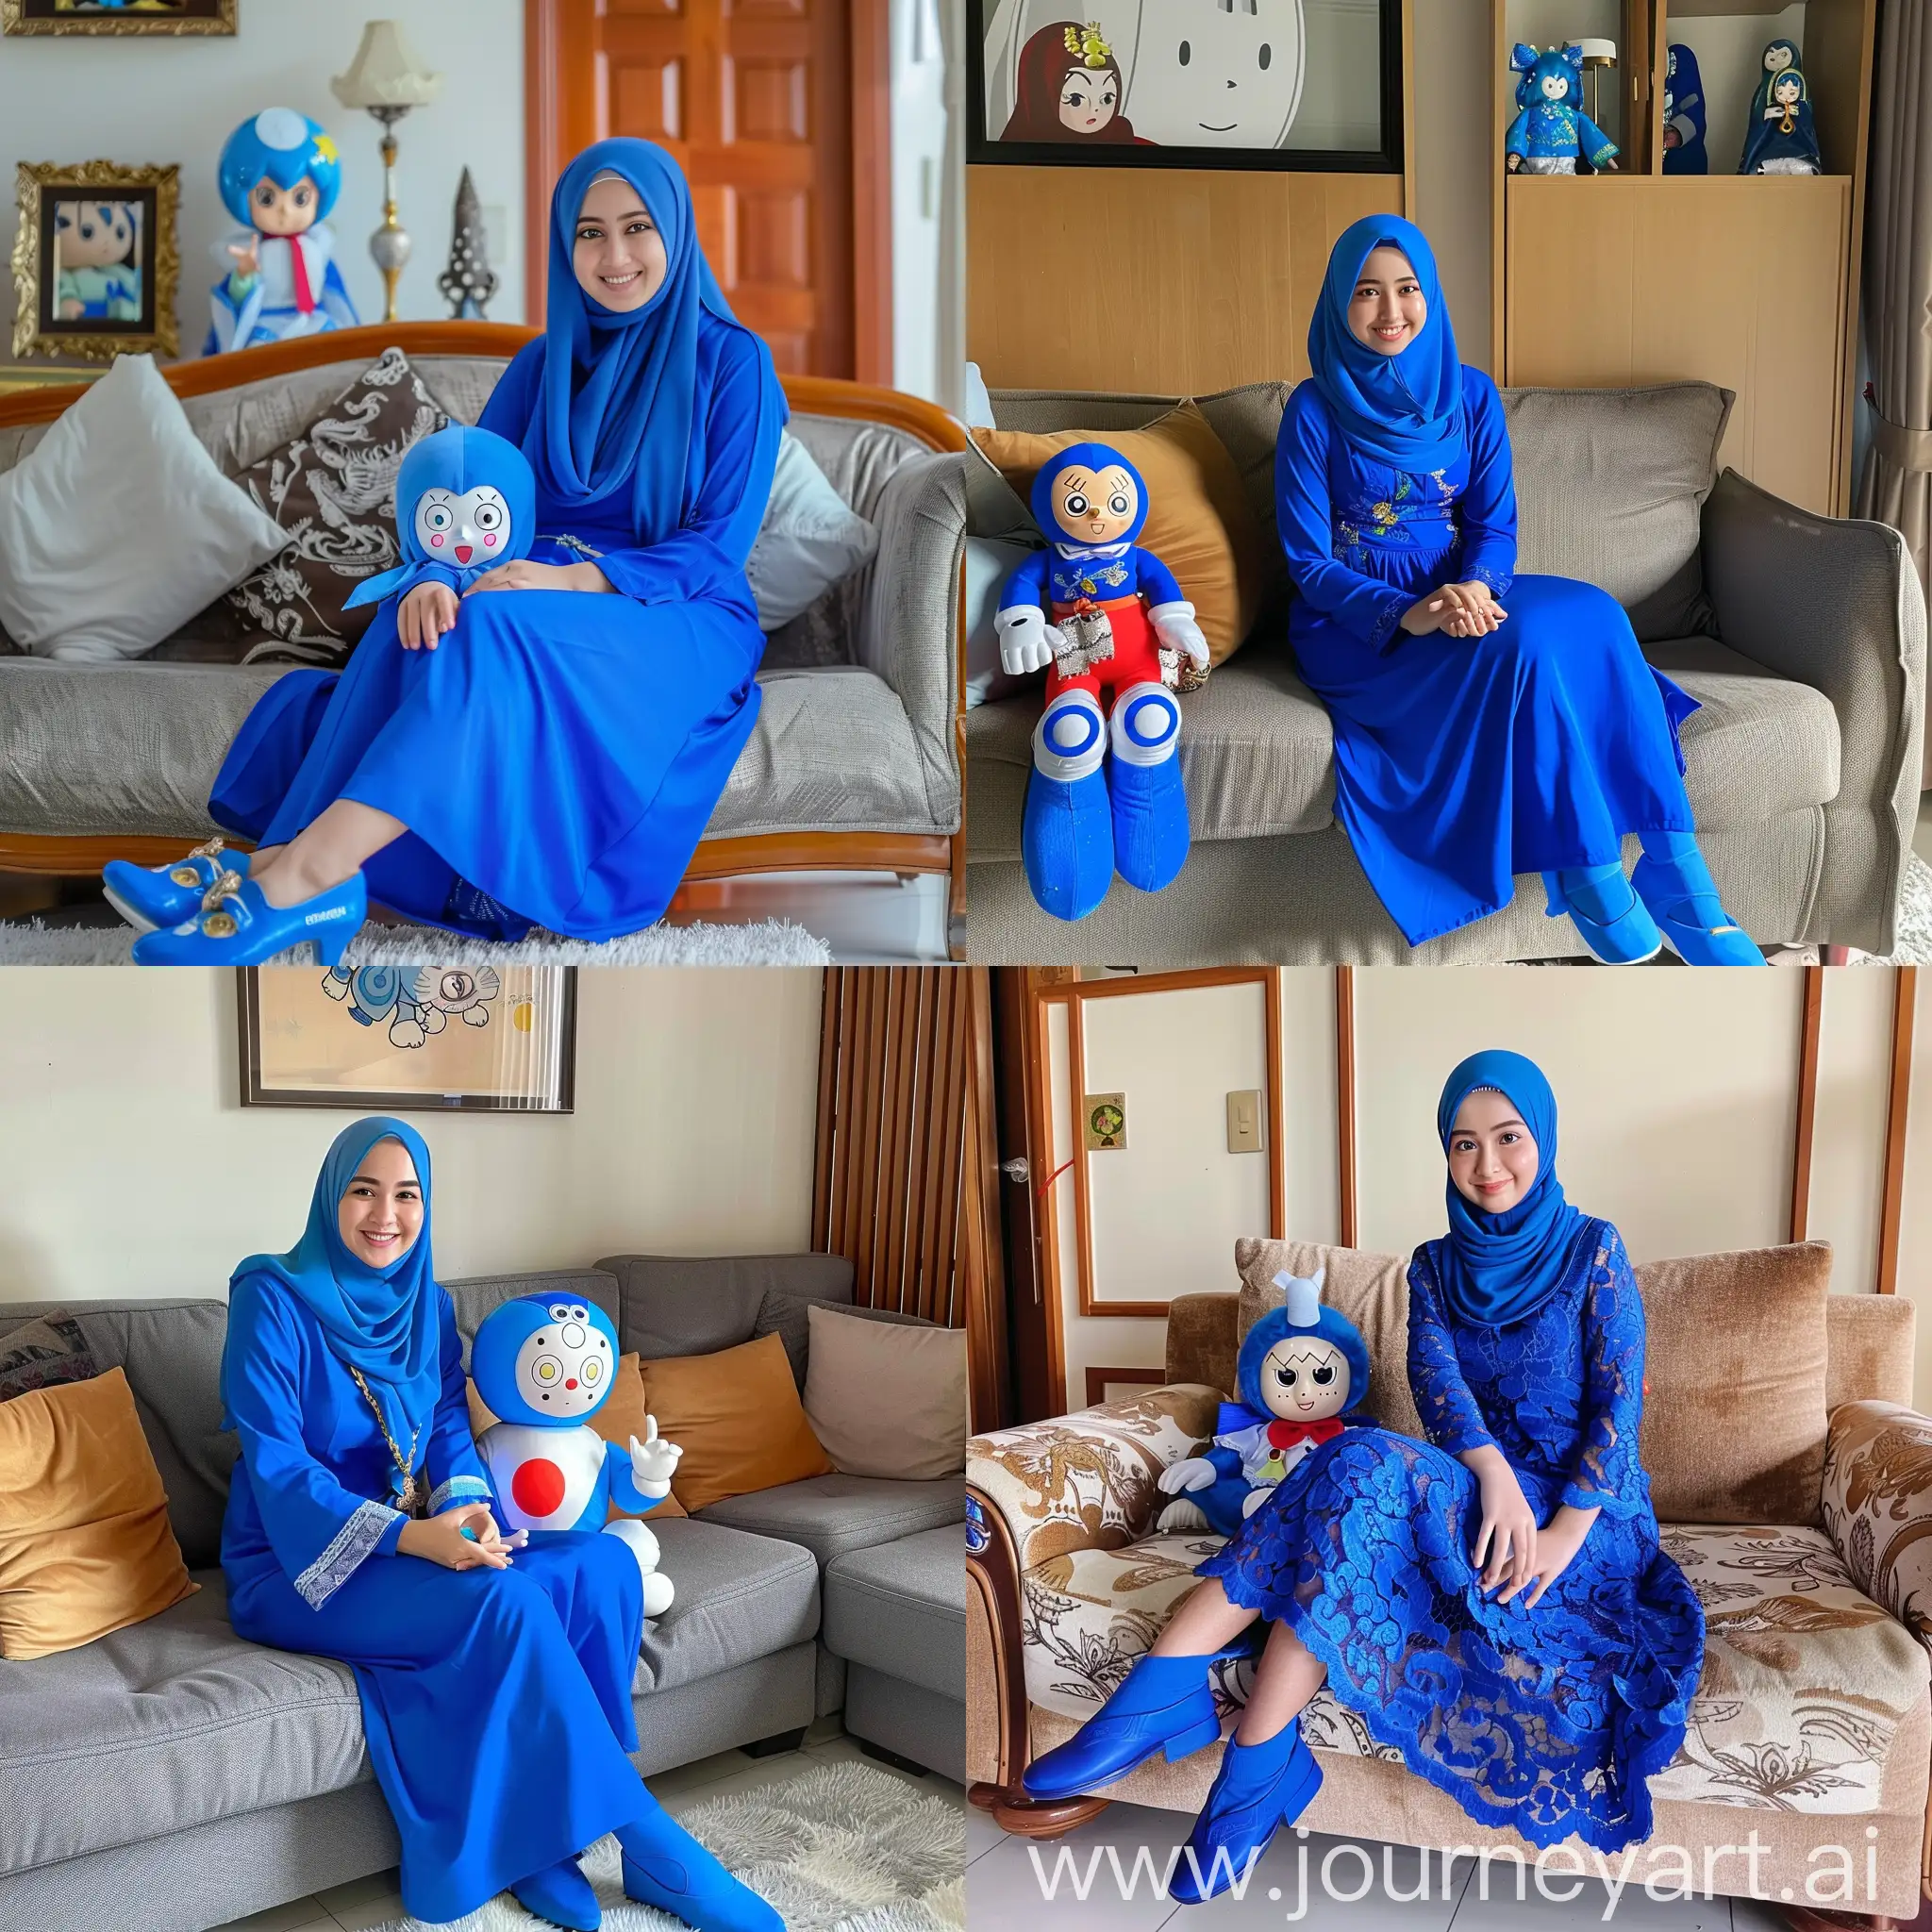 Young-Muslim-Woman-in-Blue-Dress-Relaxing-with-Doraemon-Doll-on-Sofa